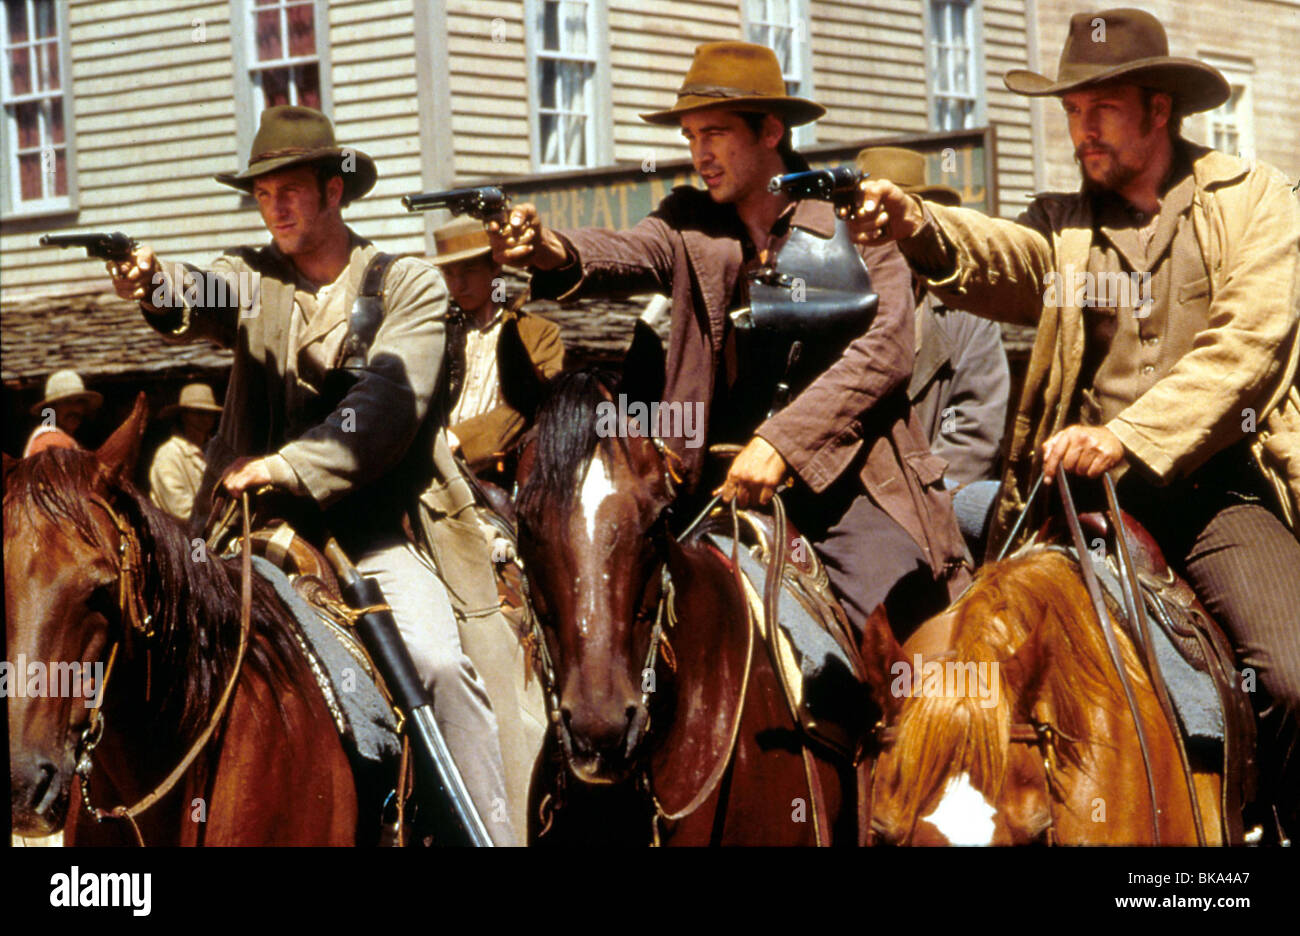 AMERICAN OUTLAWS (2001) SCOTT CAAN, GREGORY SMITH, COLIN FARRELL, GABRIEL MACHT AMOL 002 Stock Photo